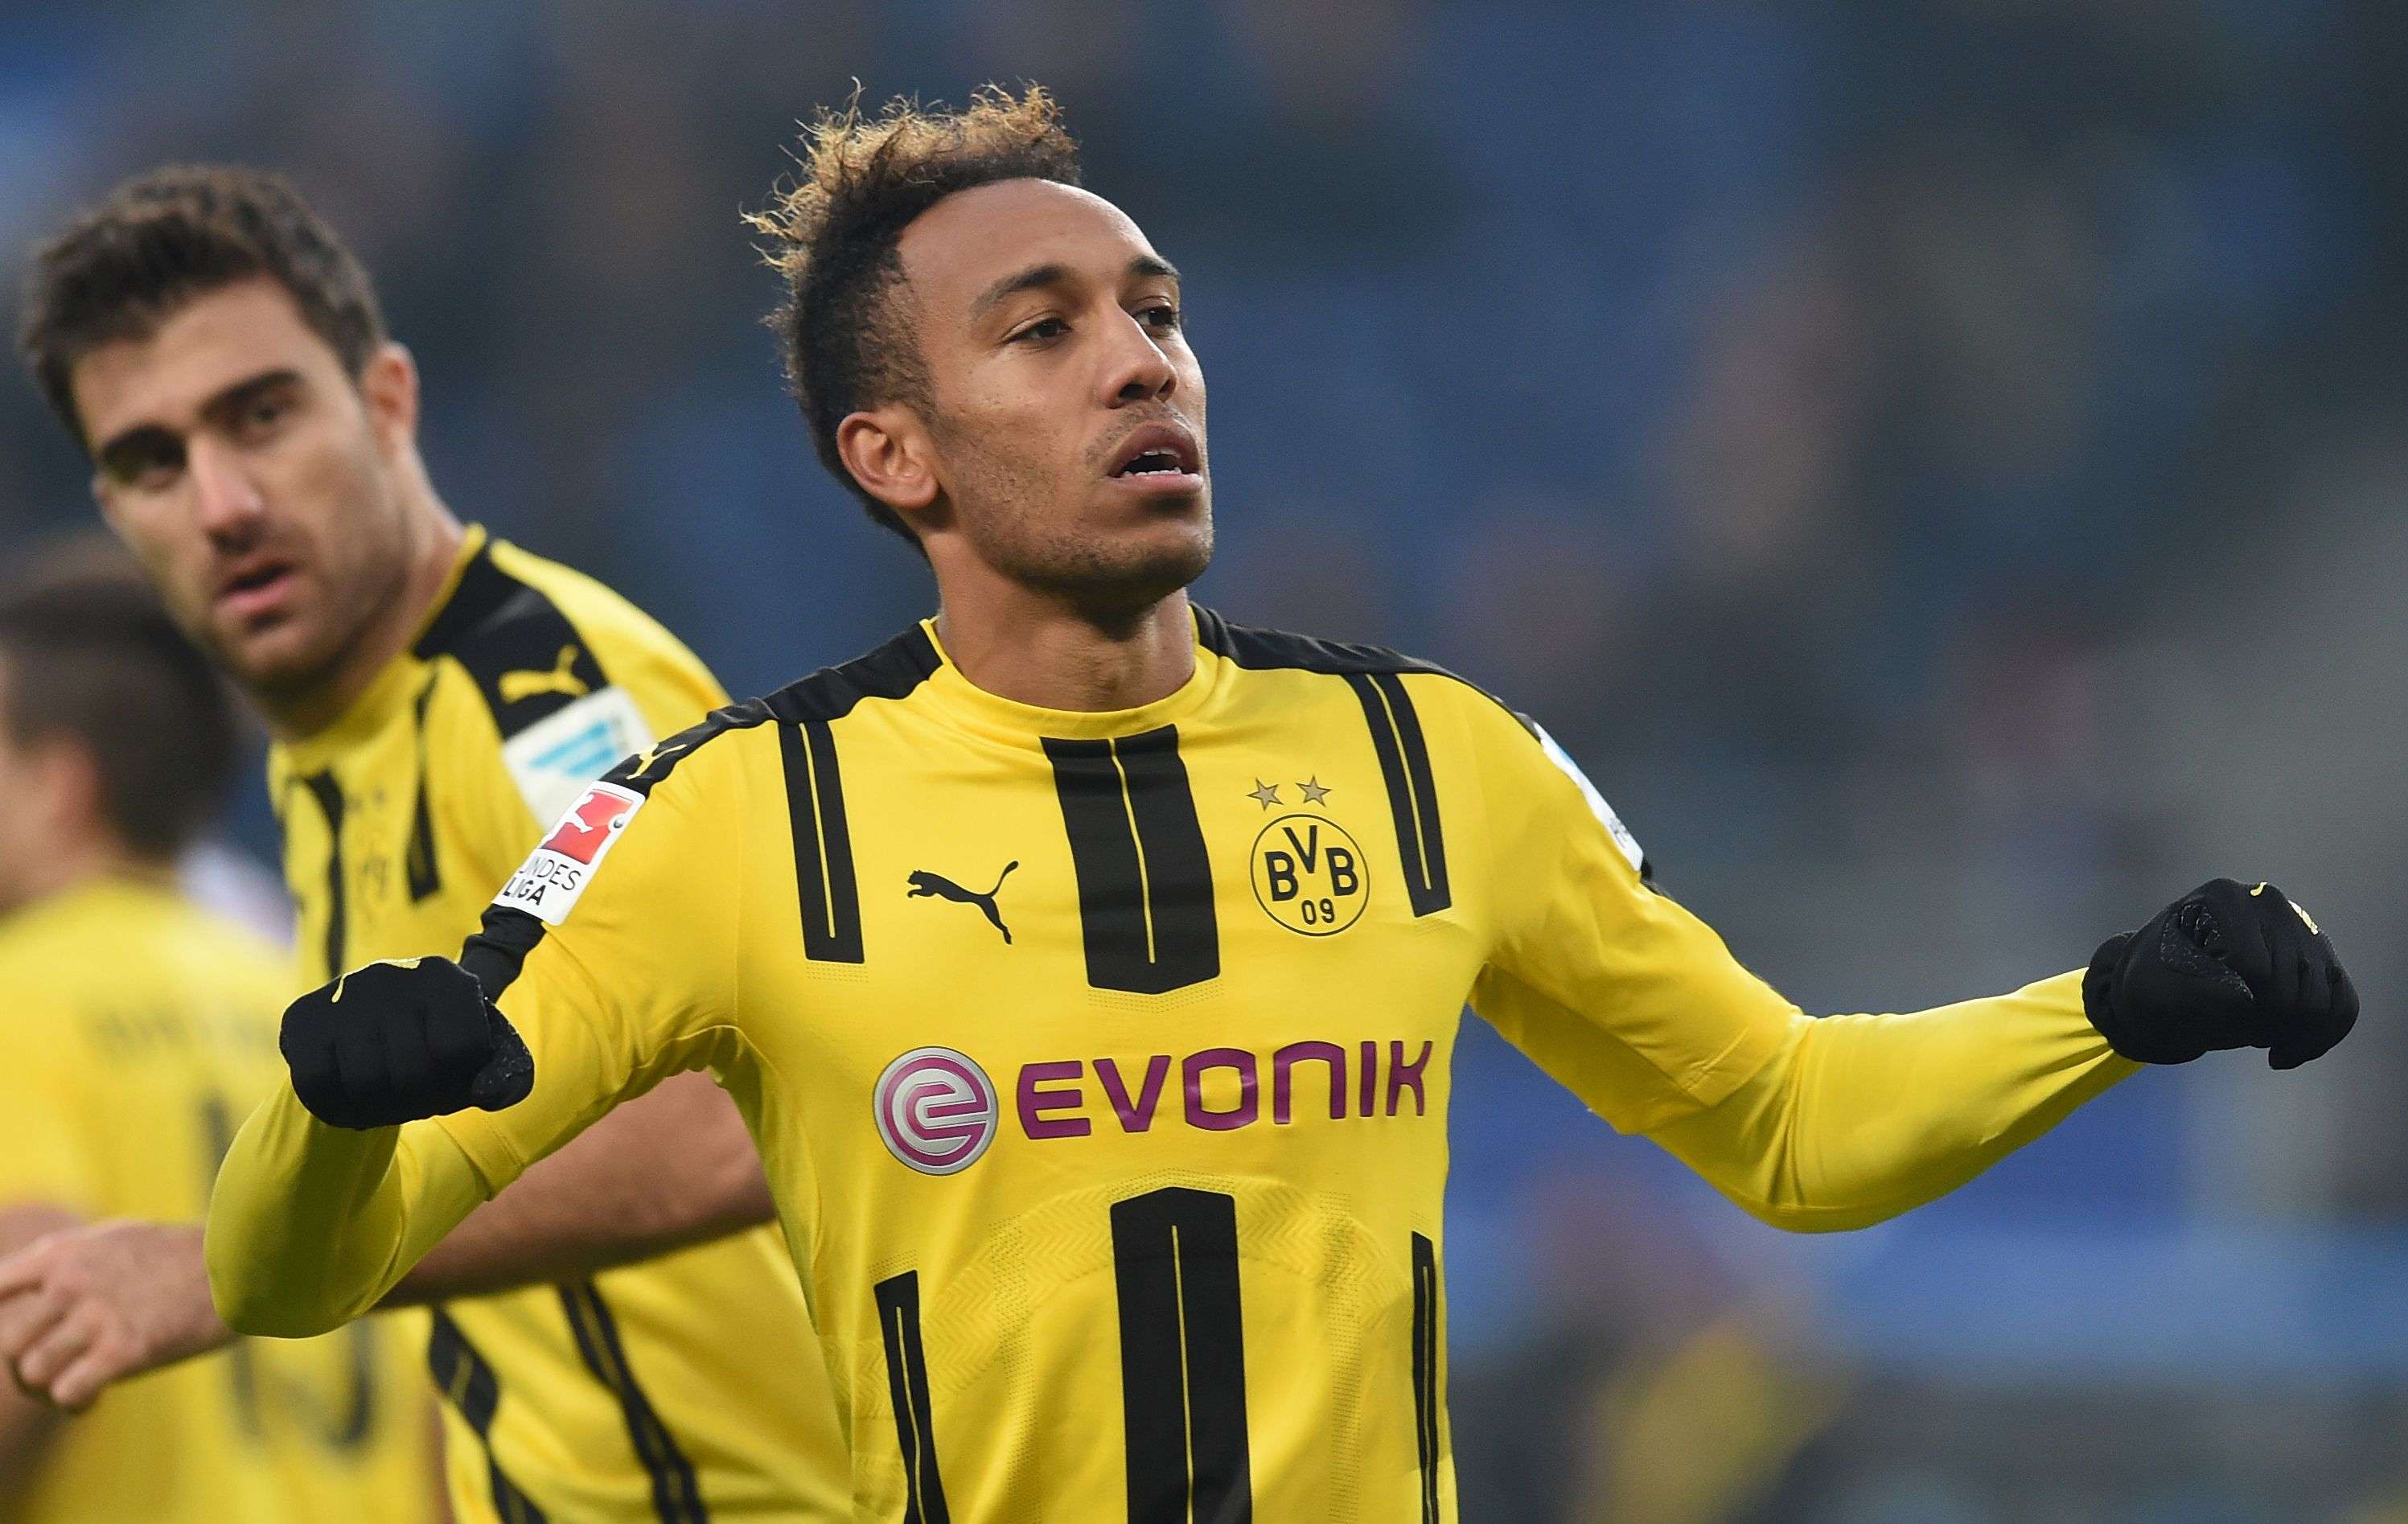 Borussia Dortmund and Gabon star Pierre-Emerick Aubameyang will lead the line for his country when they host the 2017 Africa Cup of Nations. Photo: AFP